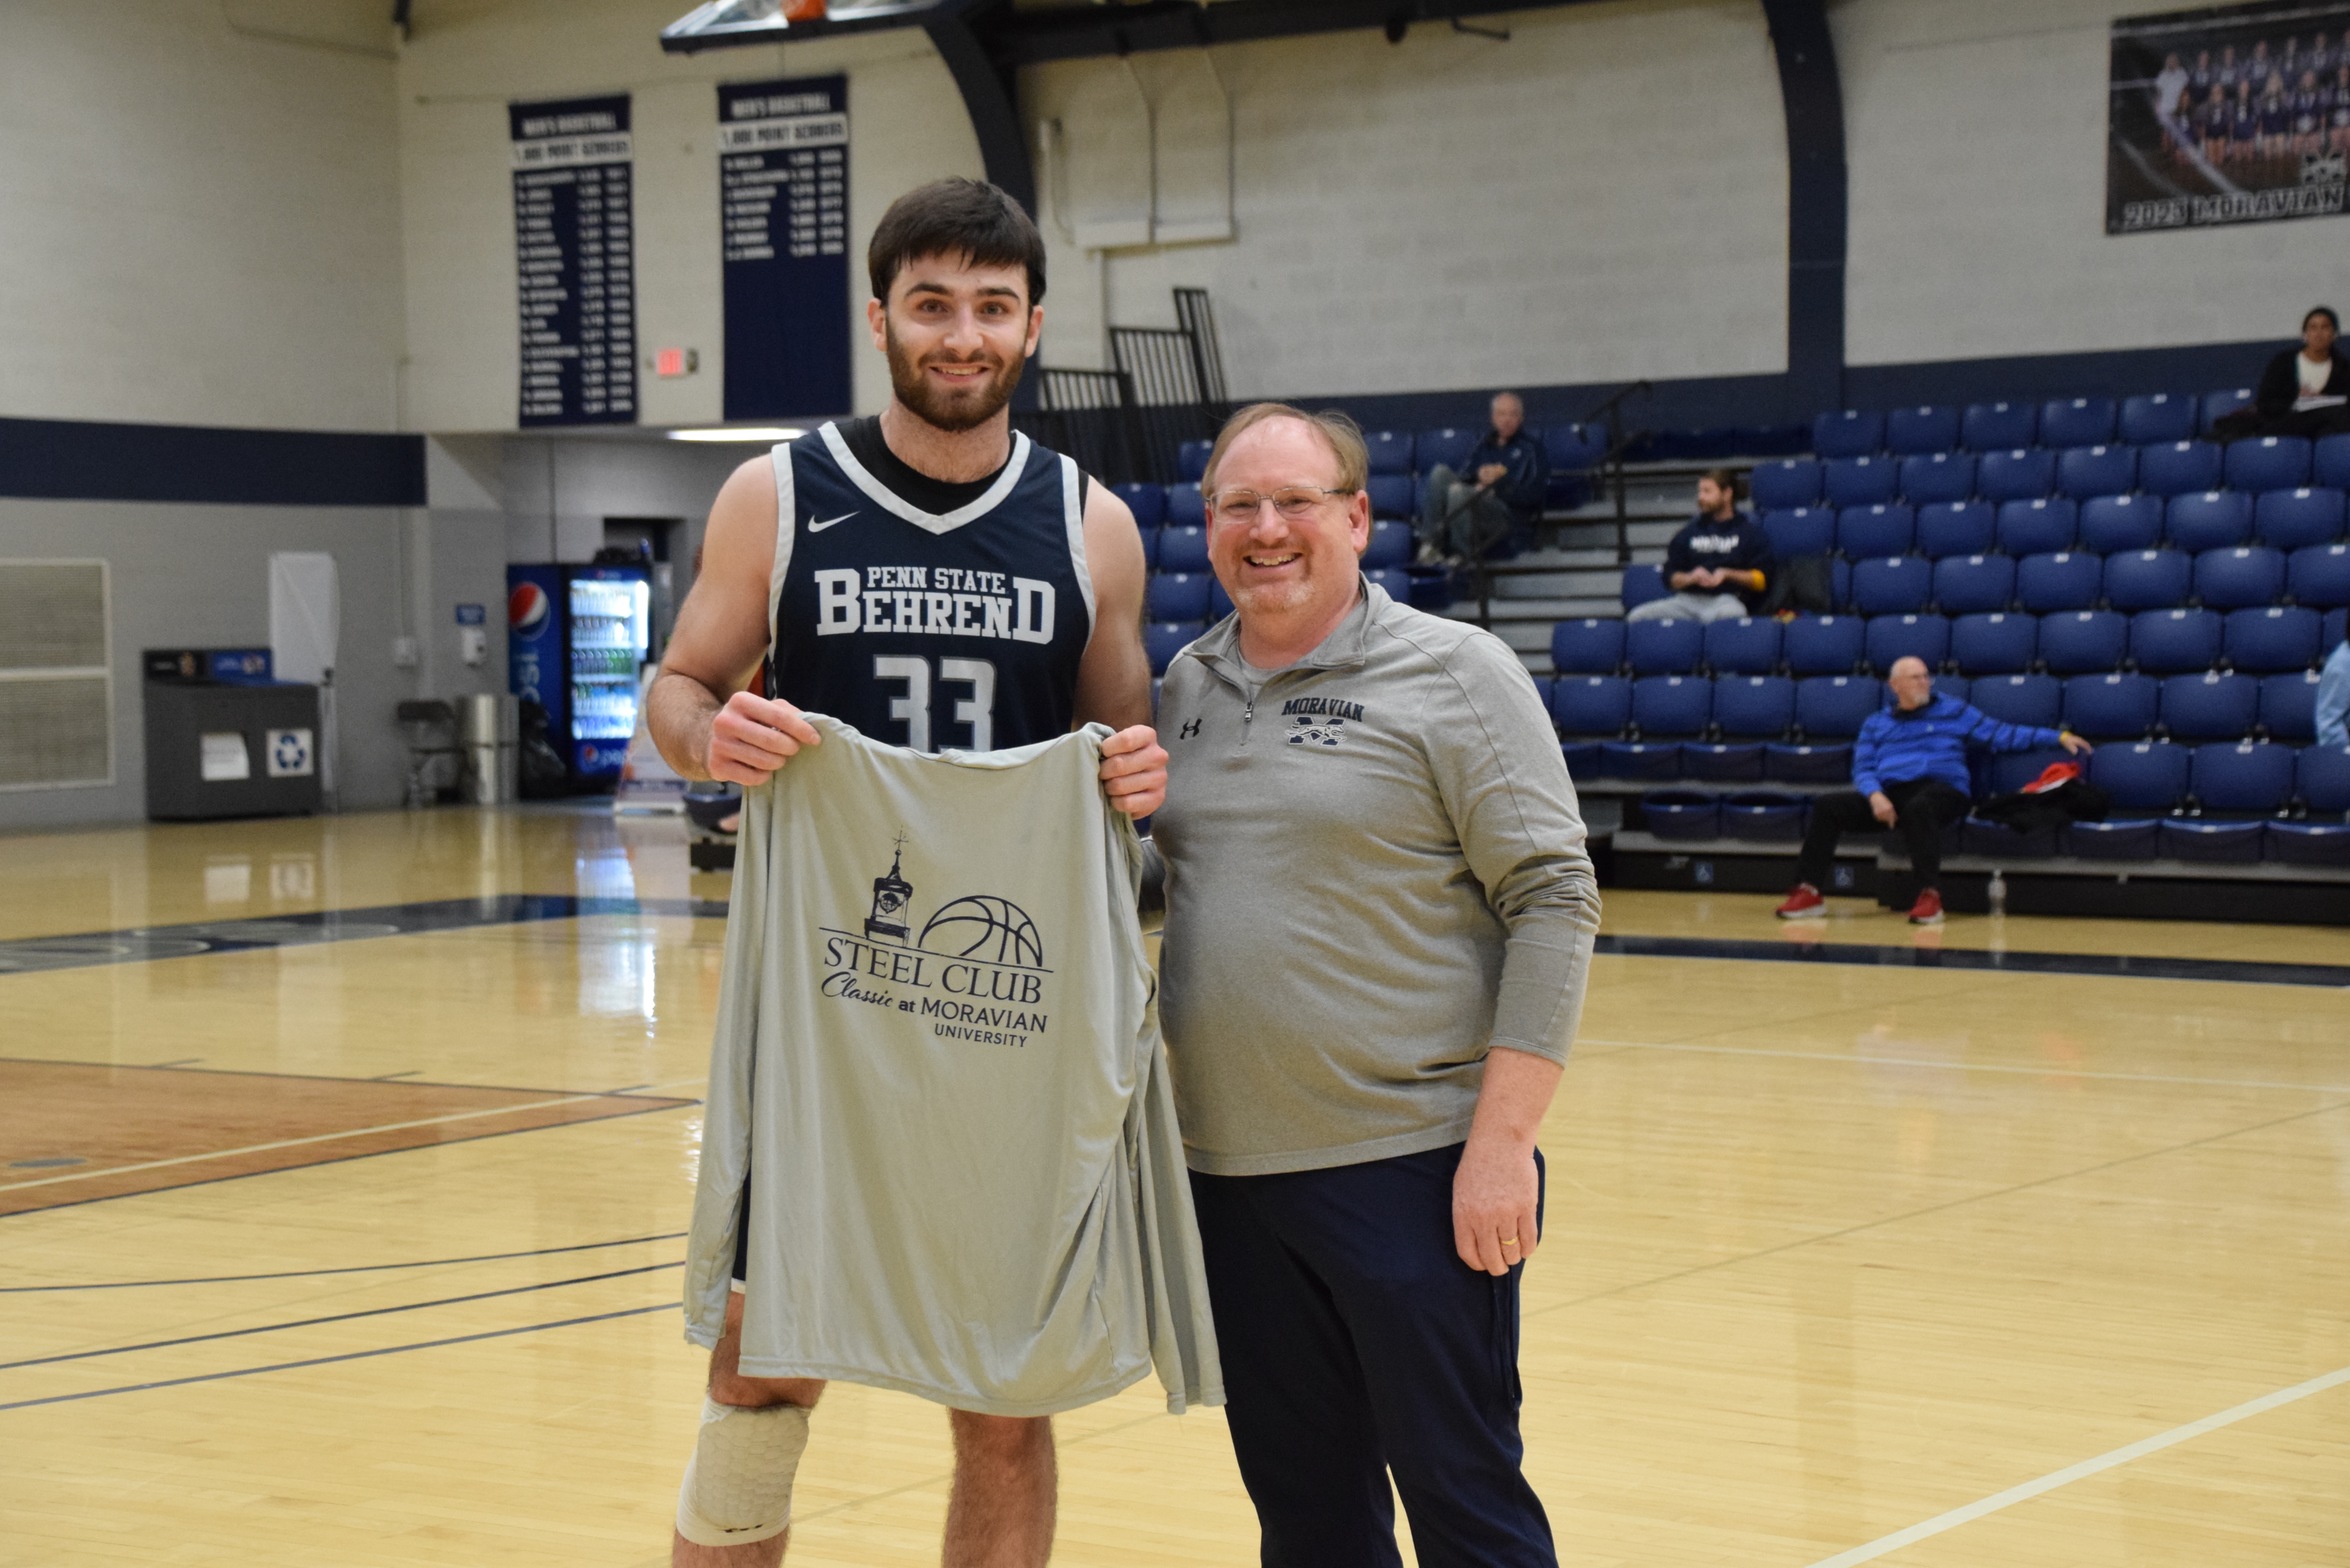 Lions Trump Hunter in Steel Club Classic Consolation Game; DiRienzo Named To All-Tournament Team